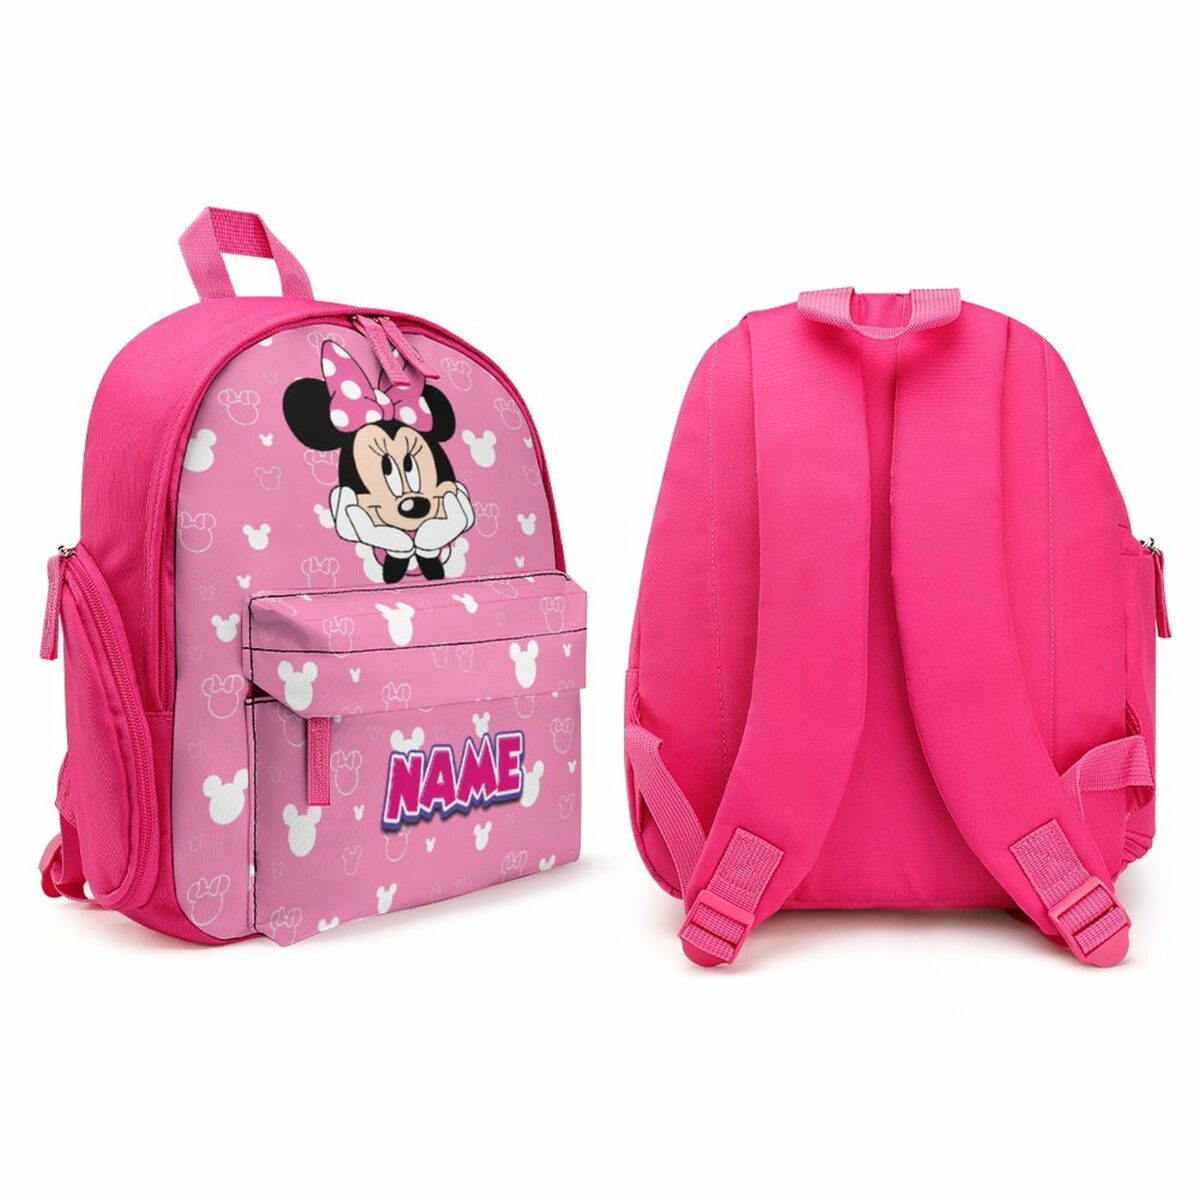 Personalized Minnie Mouse Children’s School Bag – Toddler’s Backpack Cool Kiddo 16